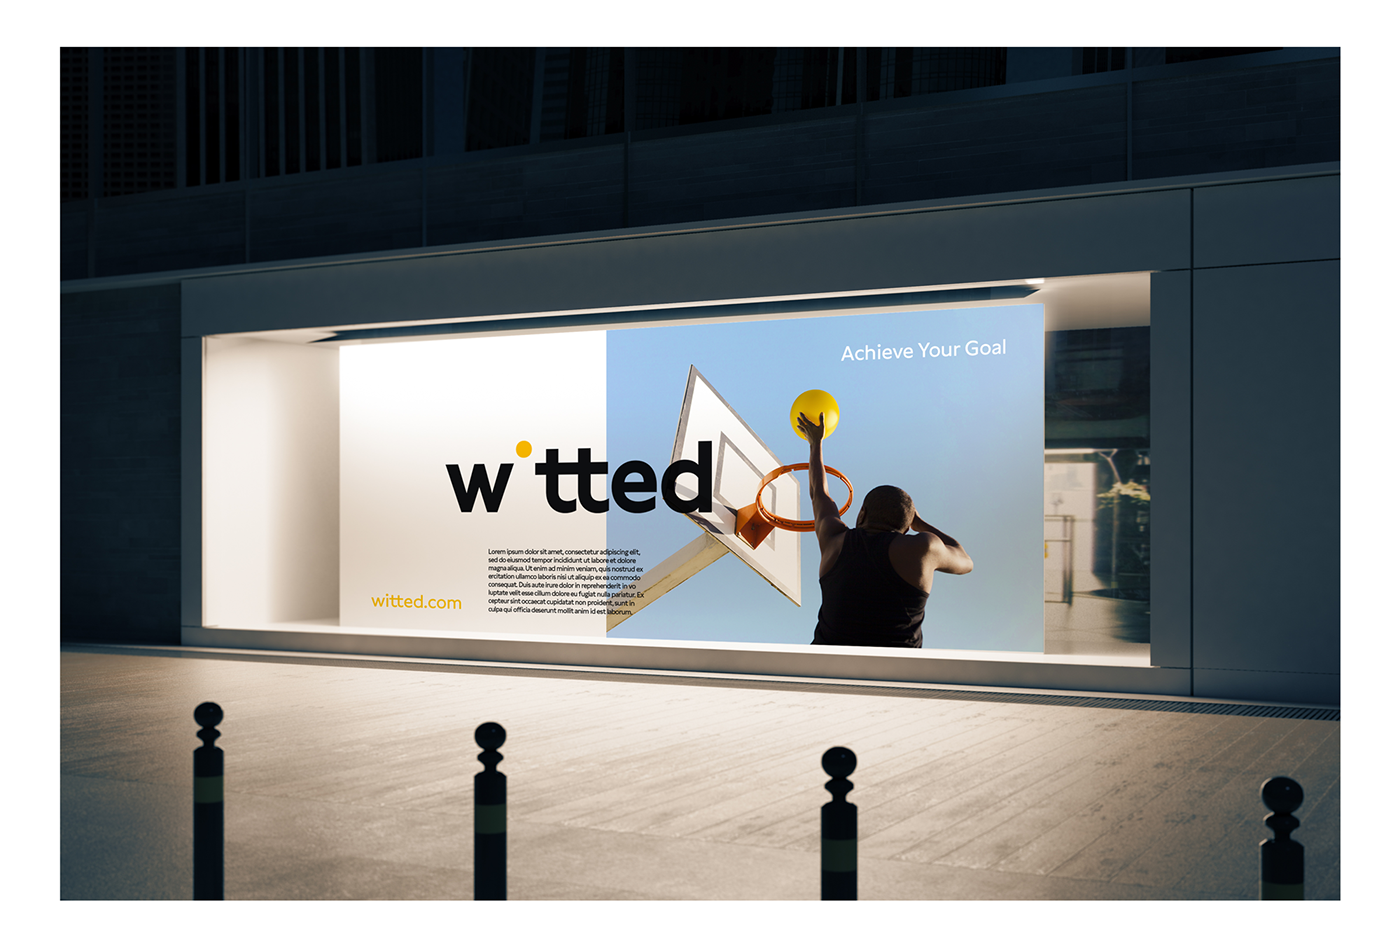 Branding and visual identity artifact from the Witted Branding: Fusion of Functionality and Visual Appeal article on Abduzeedo